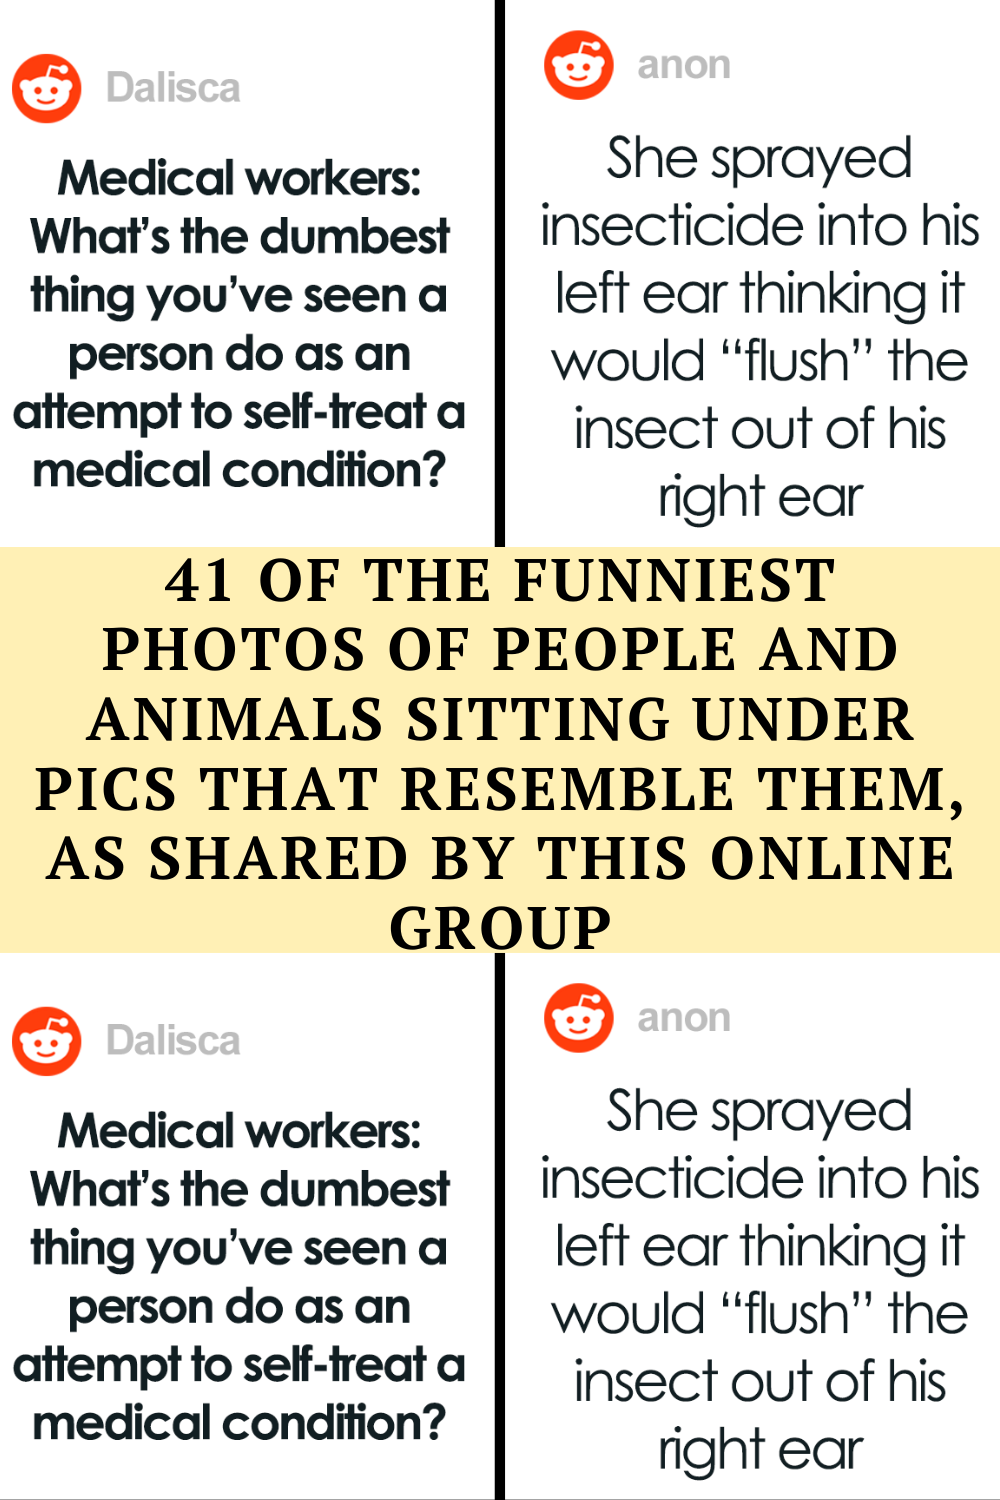 Medical Professionals Share The Dumbest Ways They’ve Seen People Self-Treat A Medical Condition